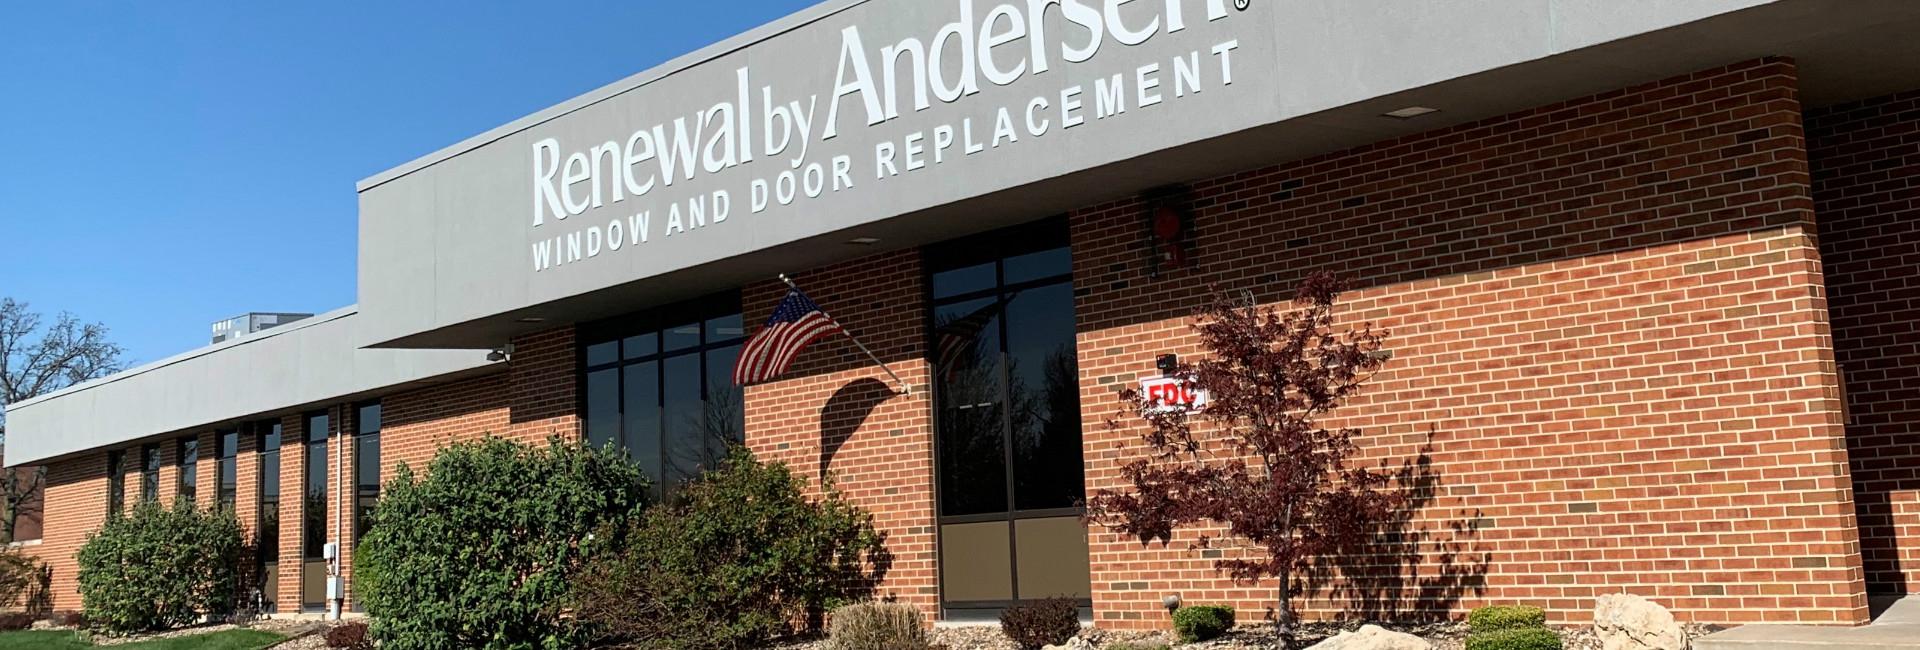 Window Replacement in St. Louis, MO - Renewal By Andersen